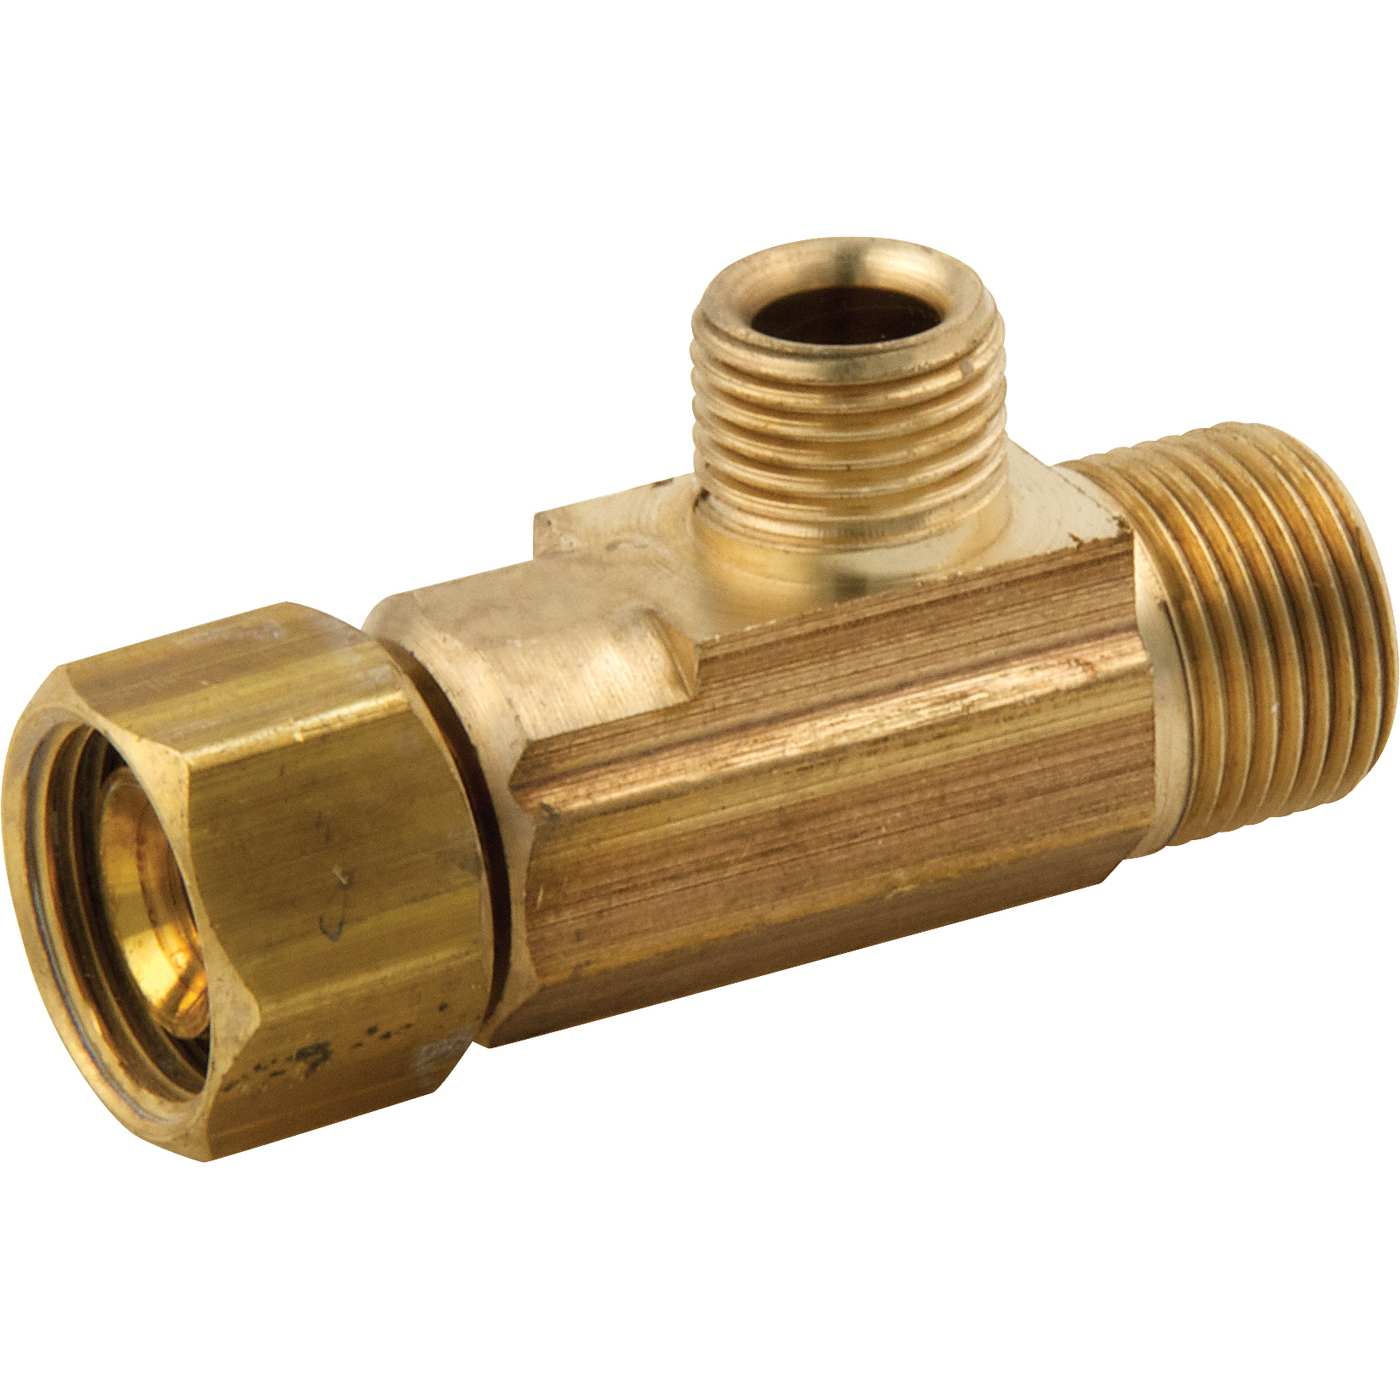 Compression Fitting Female Tee Adapter Master Plumber